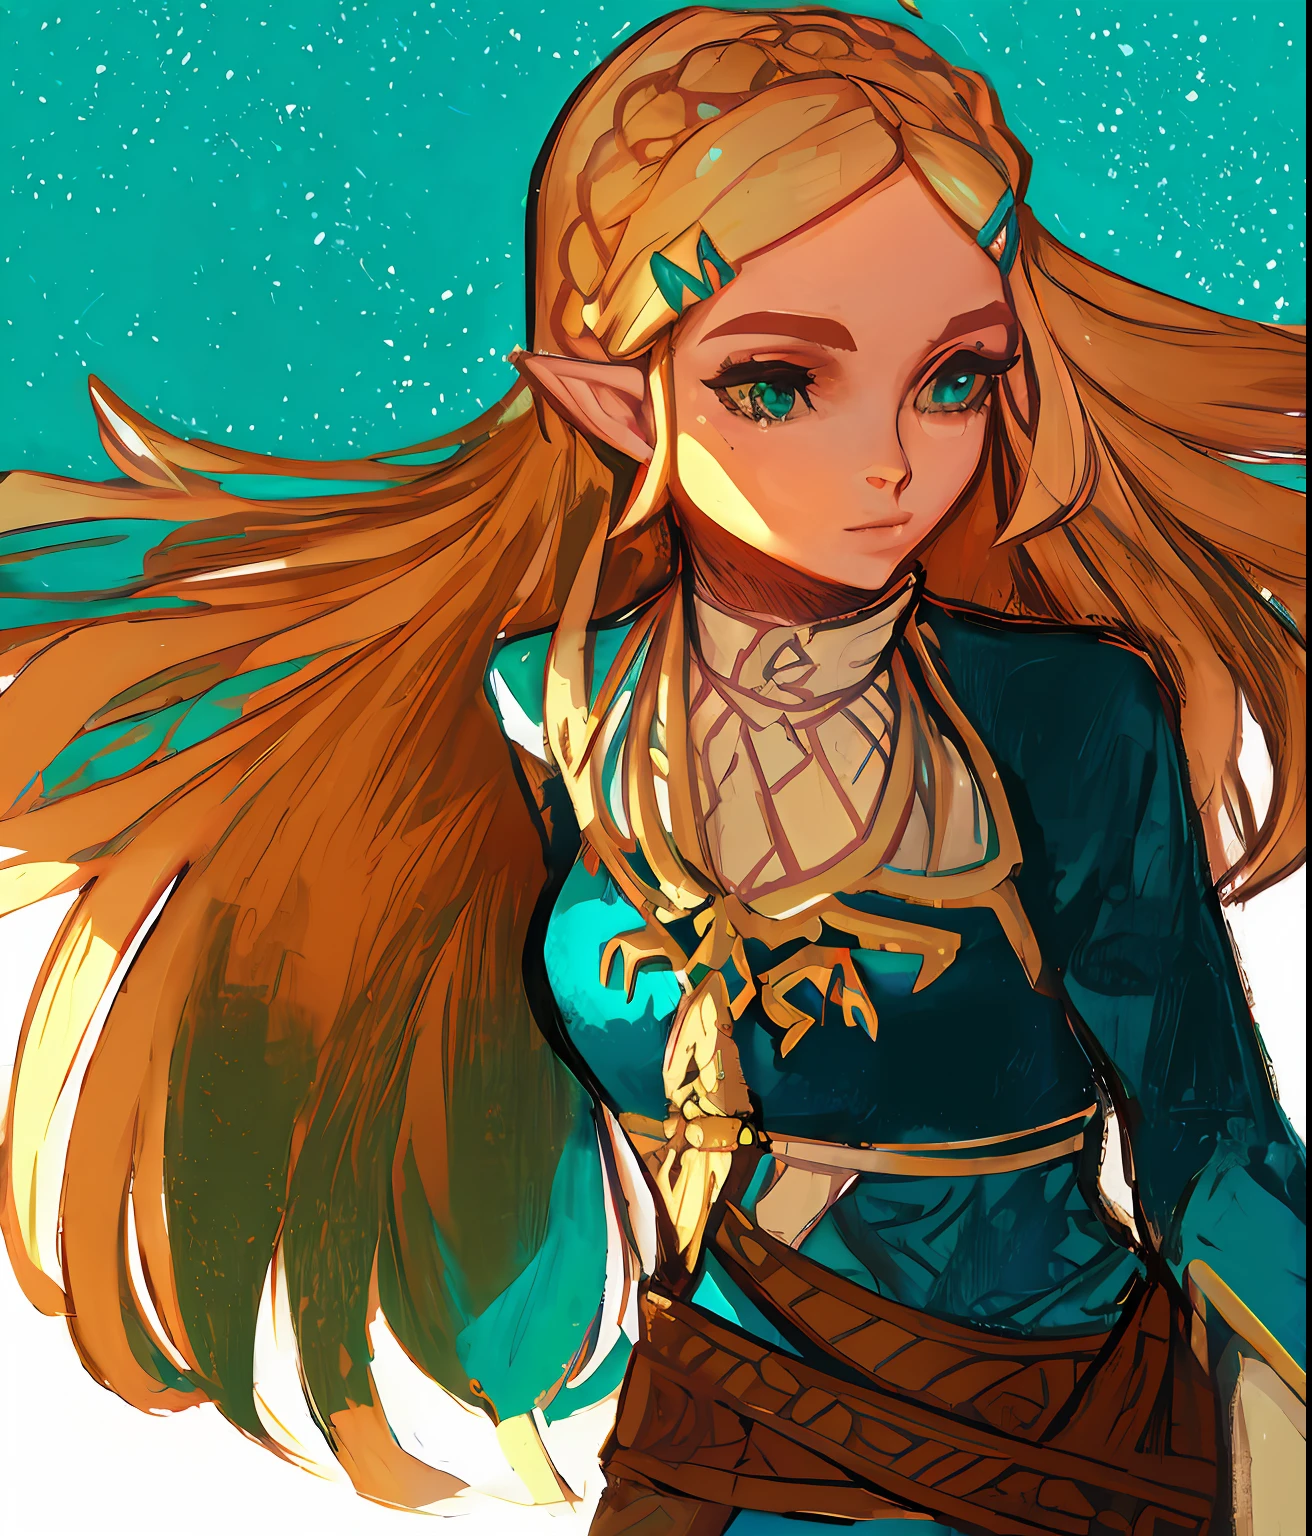 a drawing of a woman with long blonde hair holding a sword, Zelda botw, estilo botw, portrait of zelda, zelda style art, portrait of princess zelda, princess zelda, botw, from legend of zelda, Zelda, zelda with triforce, elf princess, highly detailed exquisite fanart, breath of the wild art style, breath of the wild style